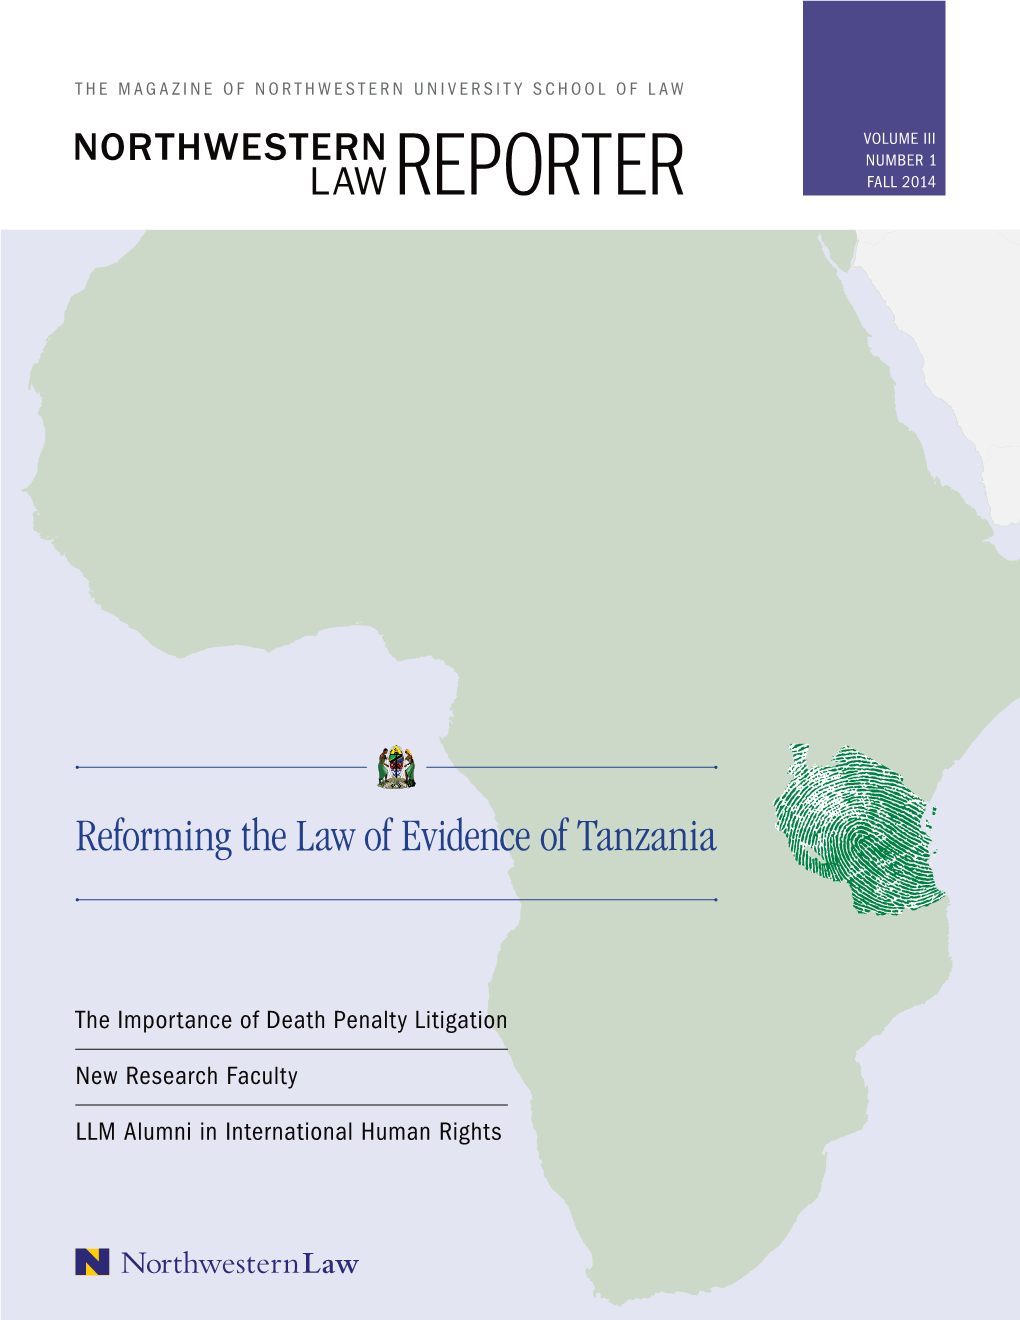 Reforming the Law of Evidence of Tanzania